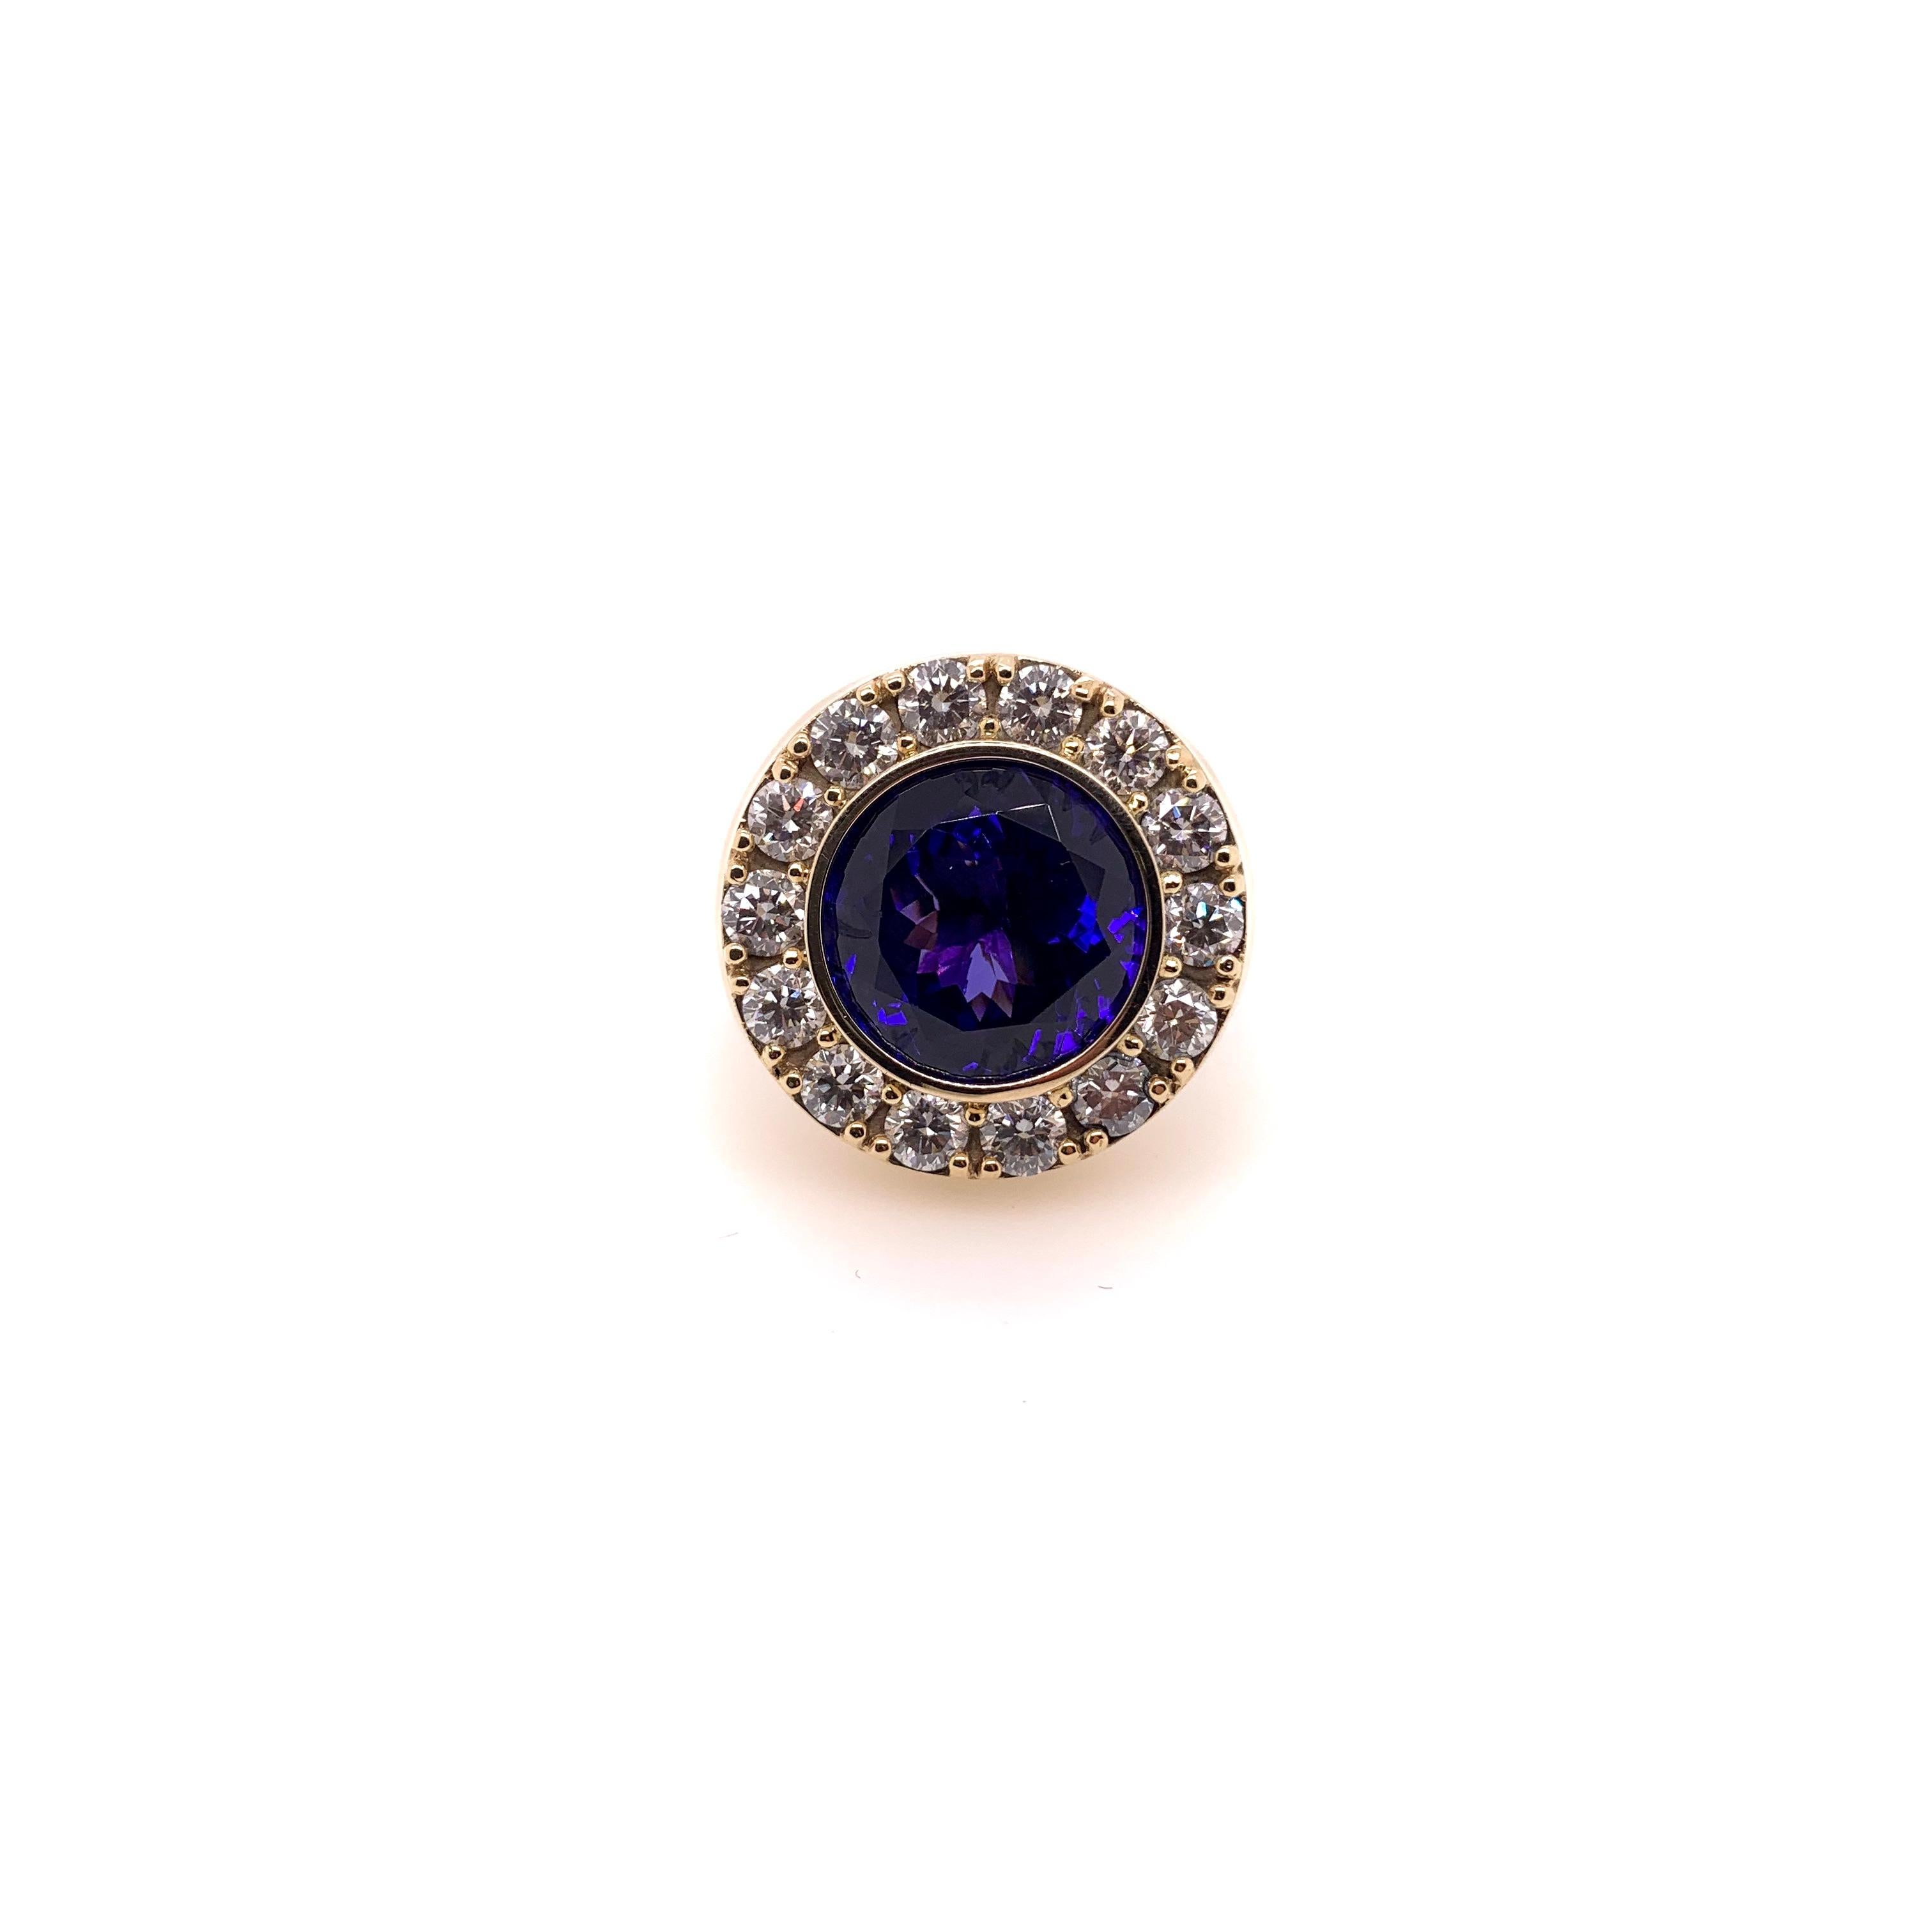 This bold, signet style tanzanite ring is for the individual who wants something different.  The enormous size tanzanite is surrounded by generous size round brilliant cut diamonds.  The setting is a solid, heavy 14k yellow gold with a nice profile